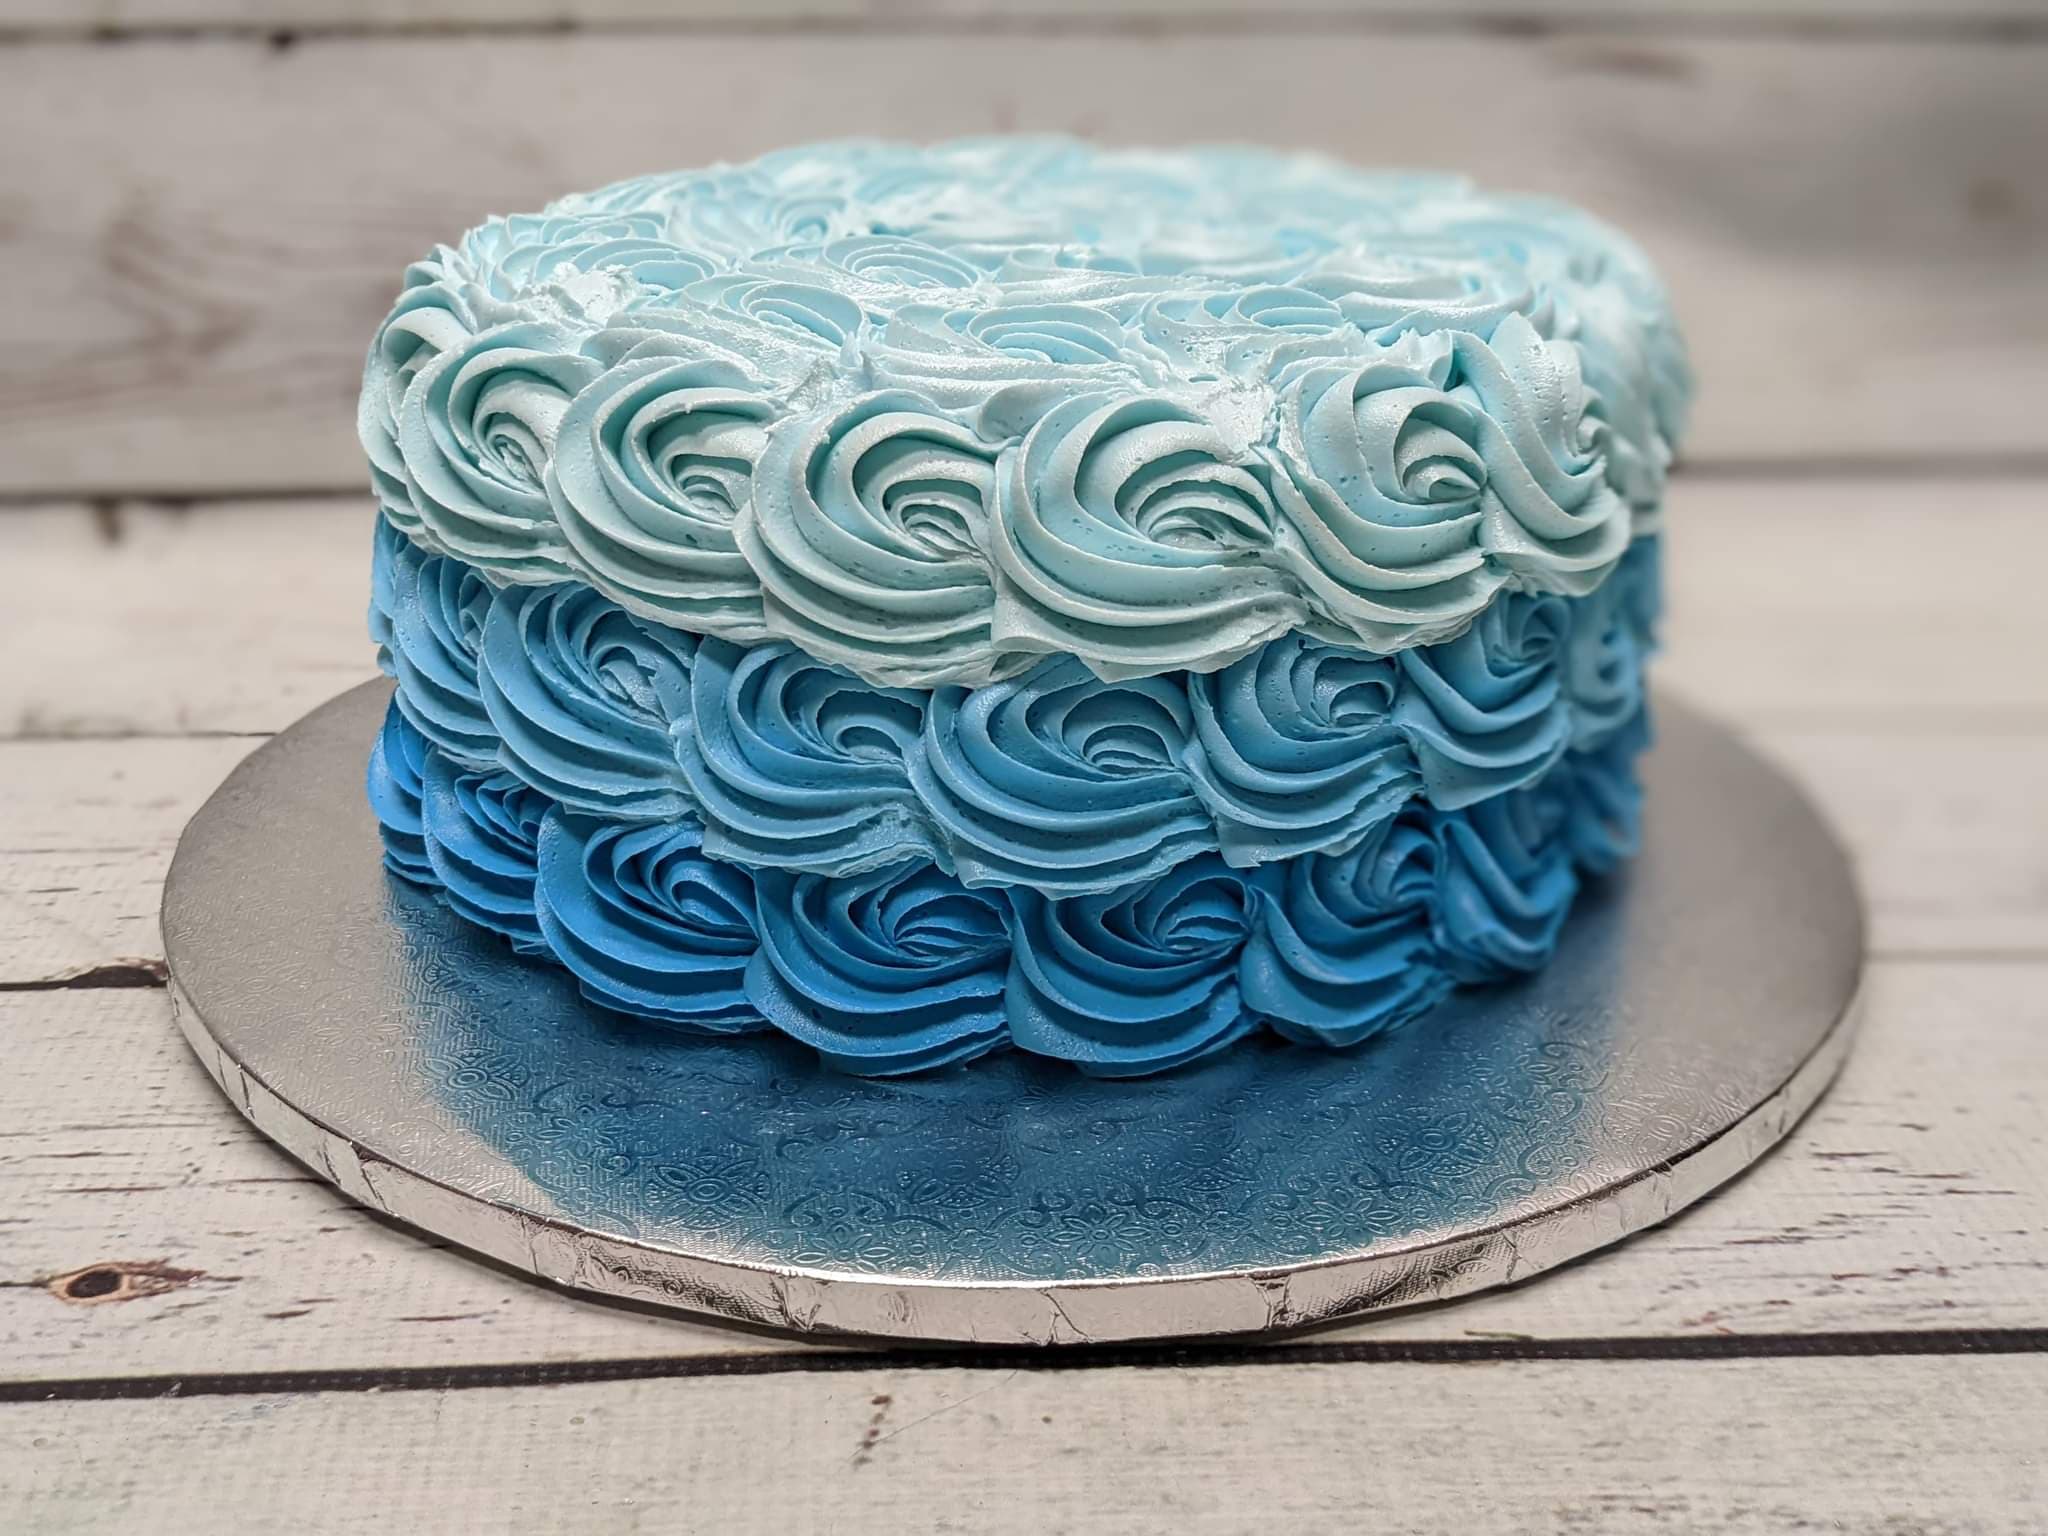 Cakes - Ombre Rosette, 3 Layers | Shop Get Caked Bakery Online